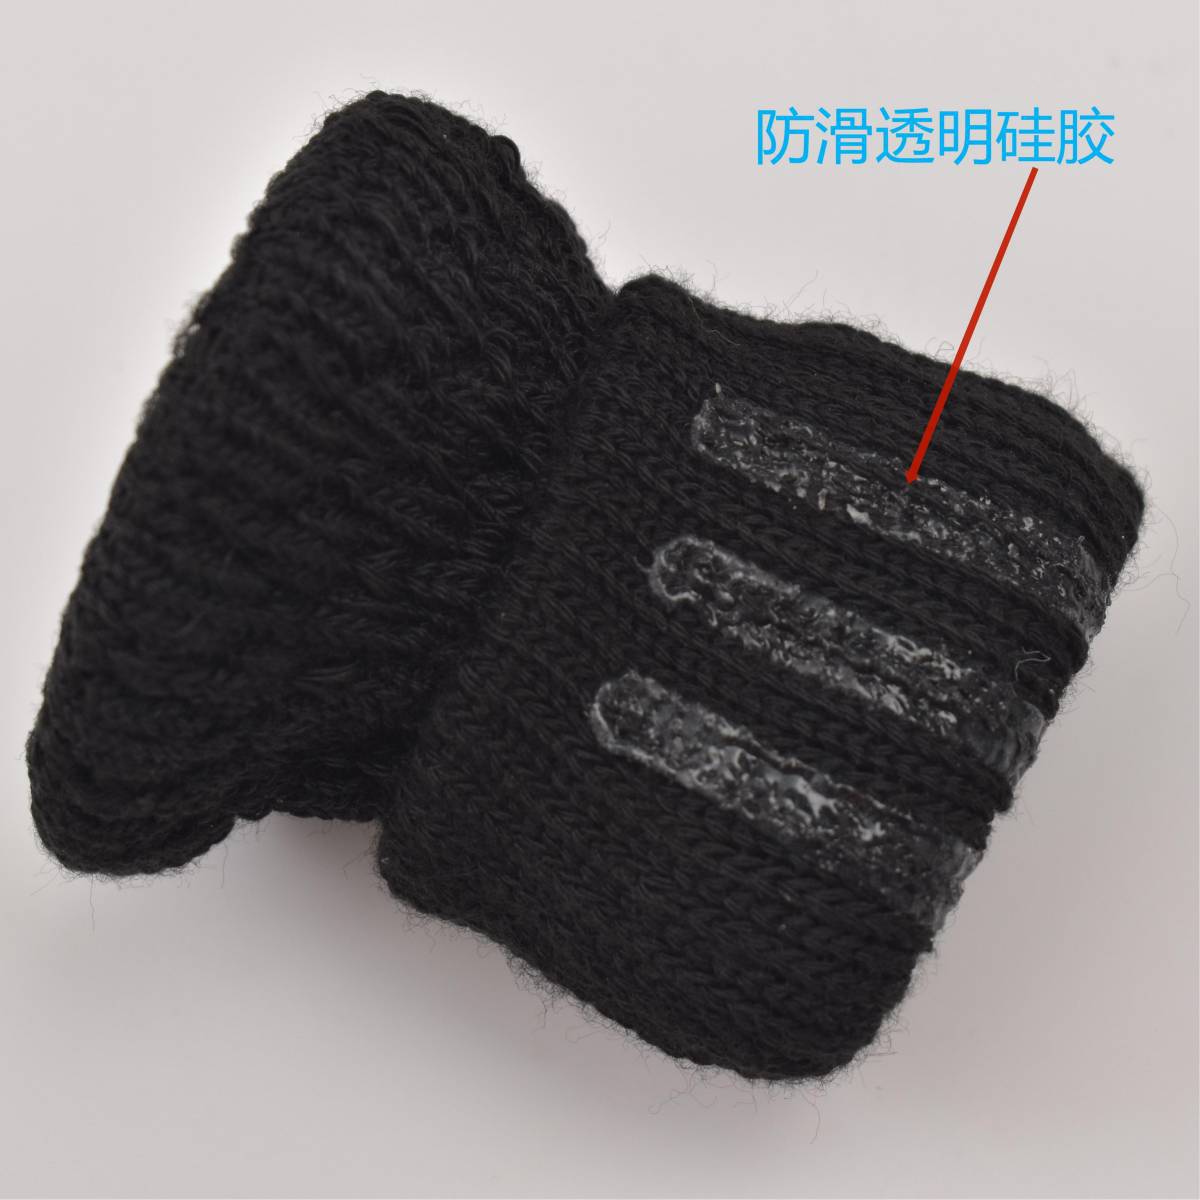 Knitted Chair Foot Strap Silicone Wool Floor Protective Cover Thickening and Wear-Resistant Non-Slip Silent Stool Chair Felt Mats